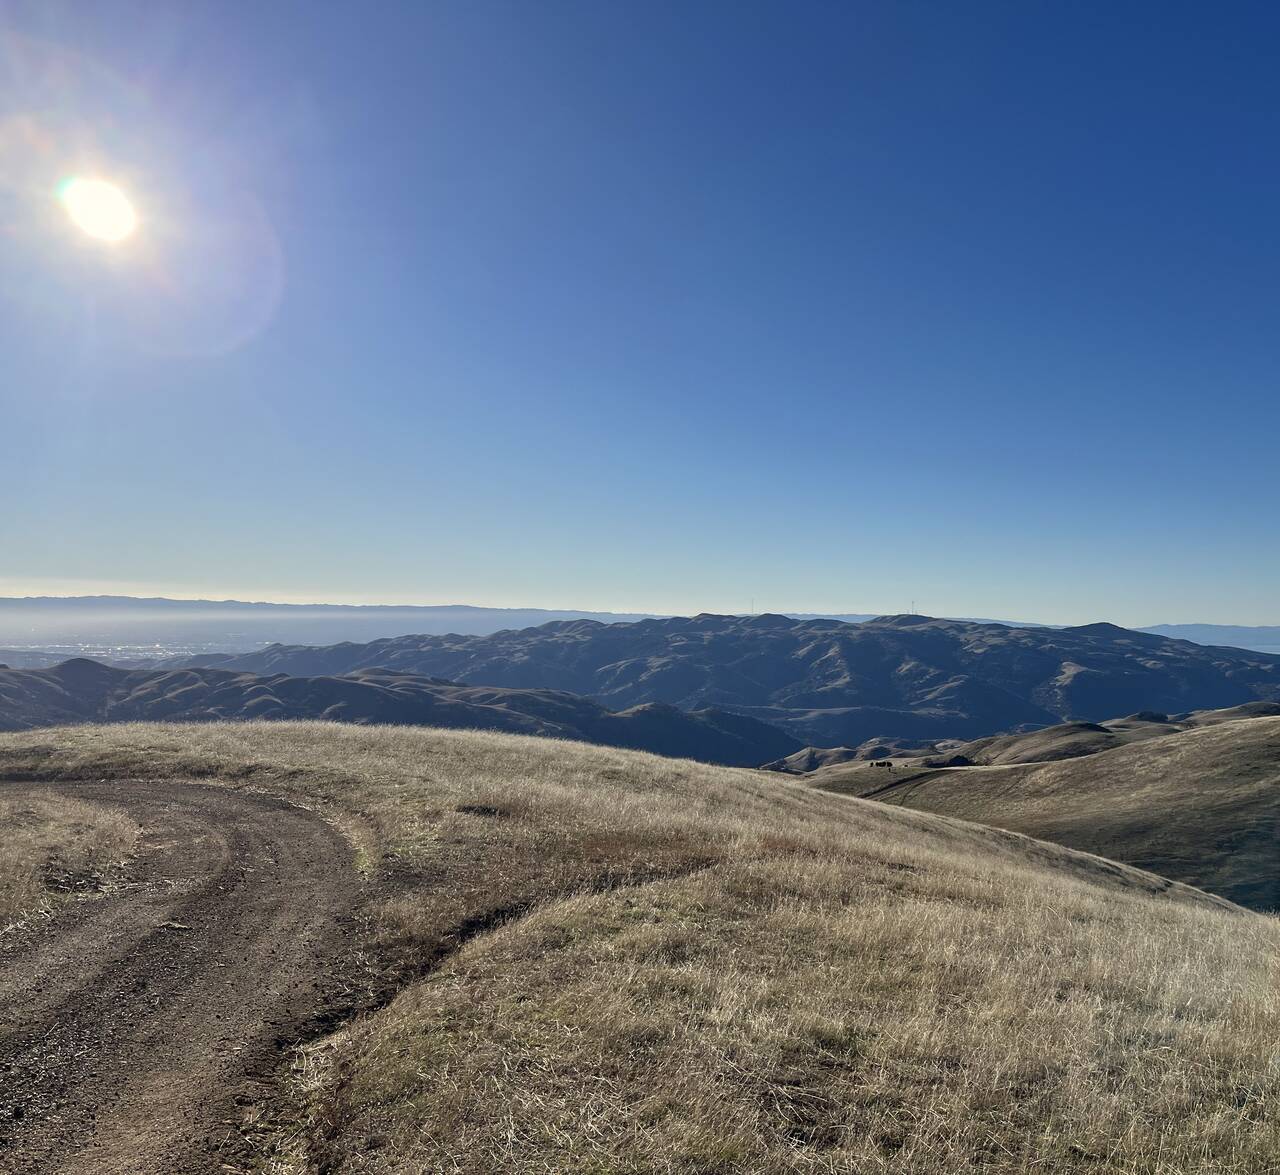 Similar to the previous photograph, Mission Peak is still visible on the horizon